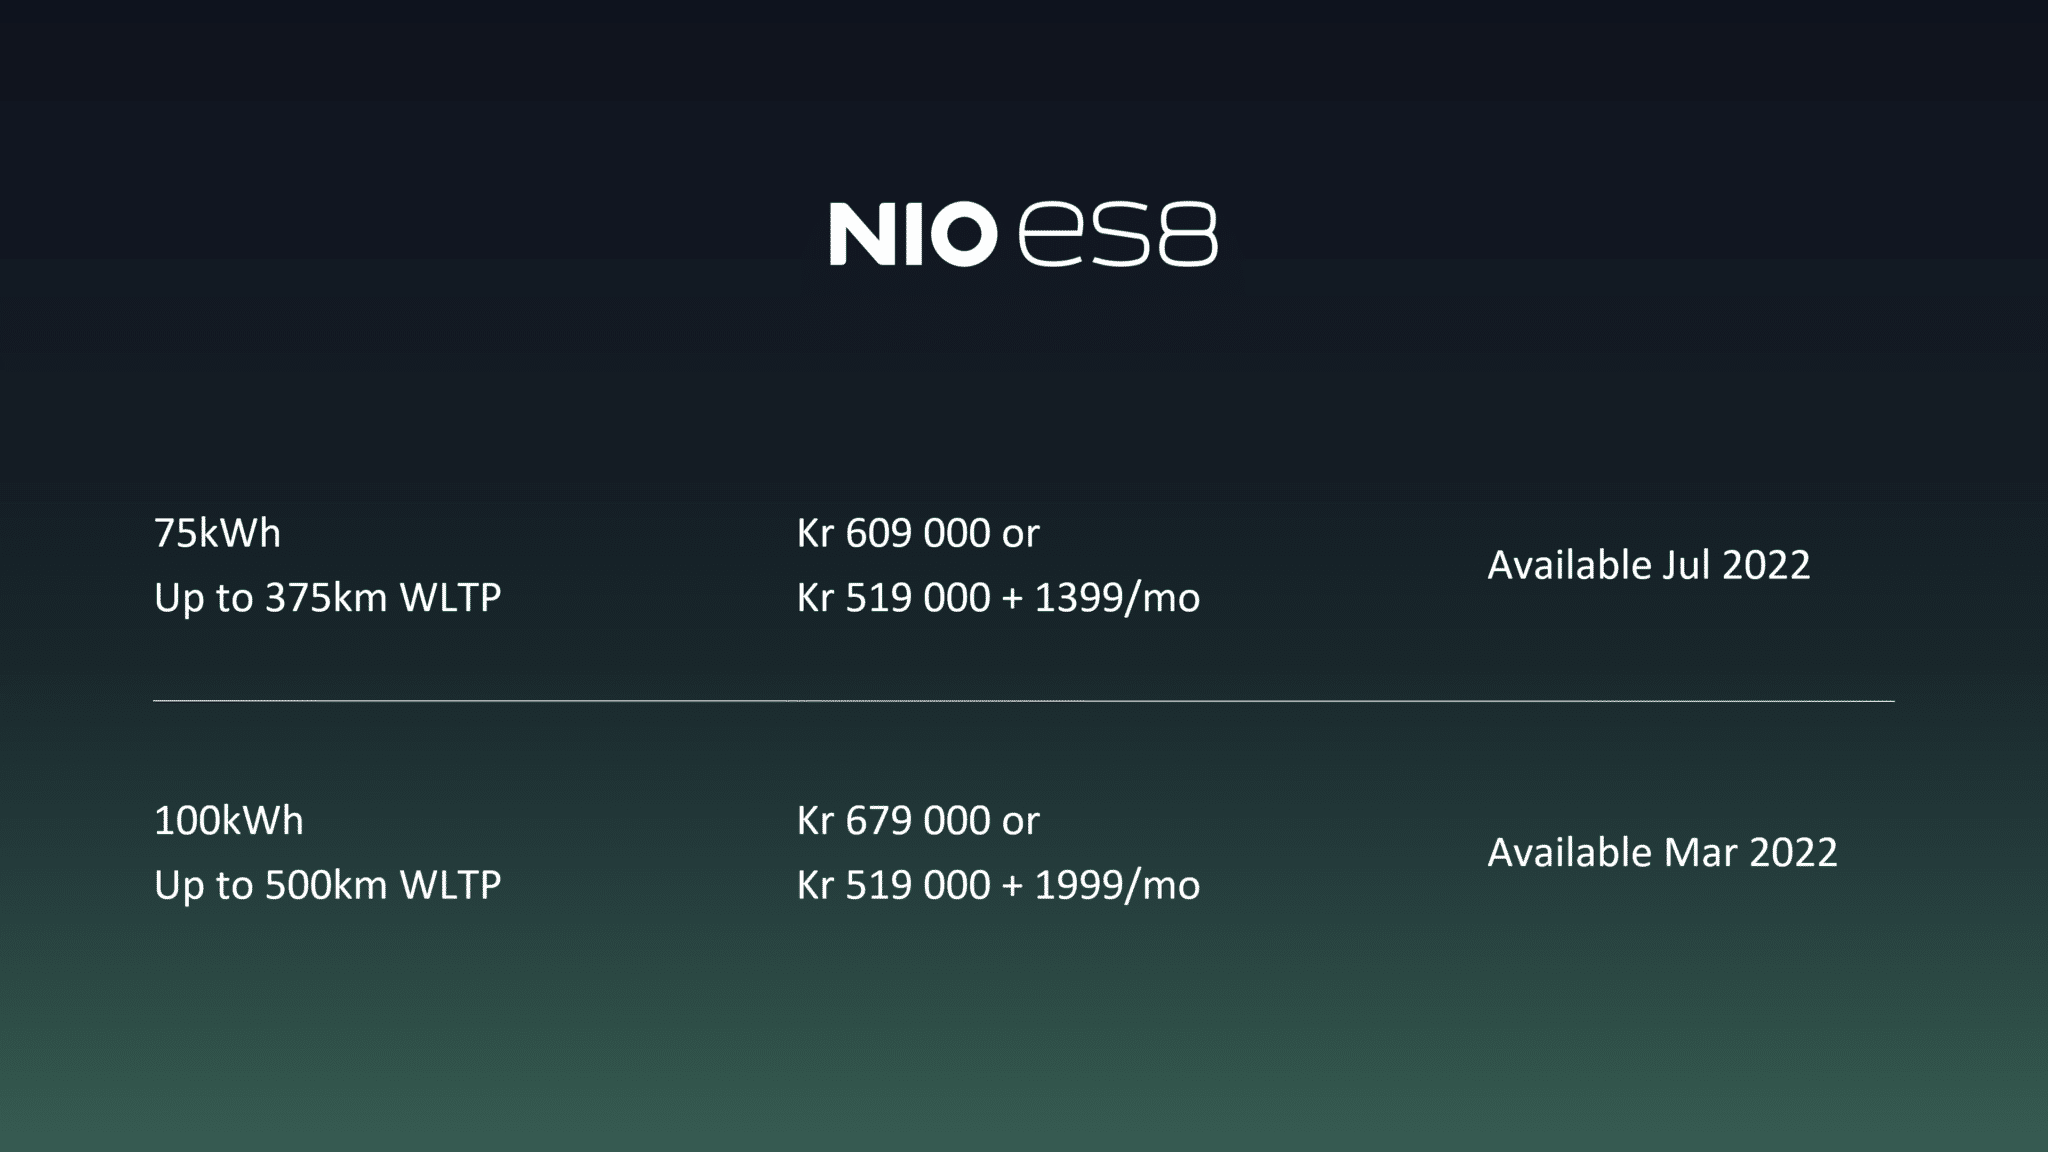 NIO ES8 starts at lower price in Norway than in China, offers battery rental option-CnEVPost